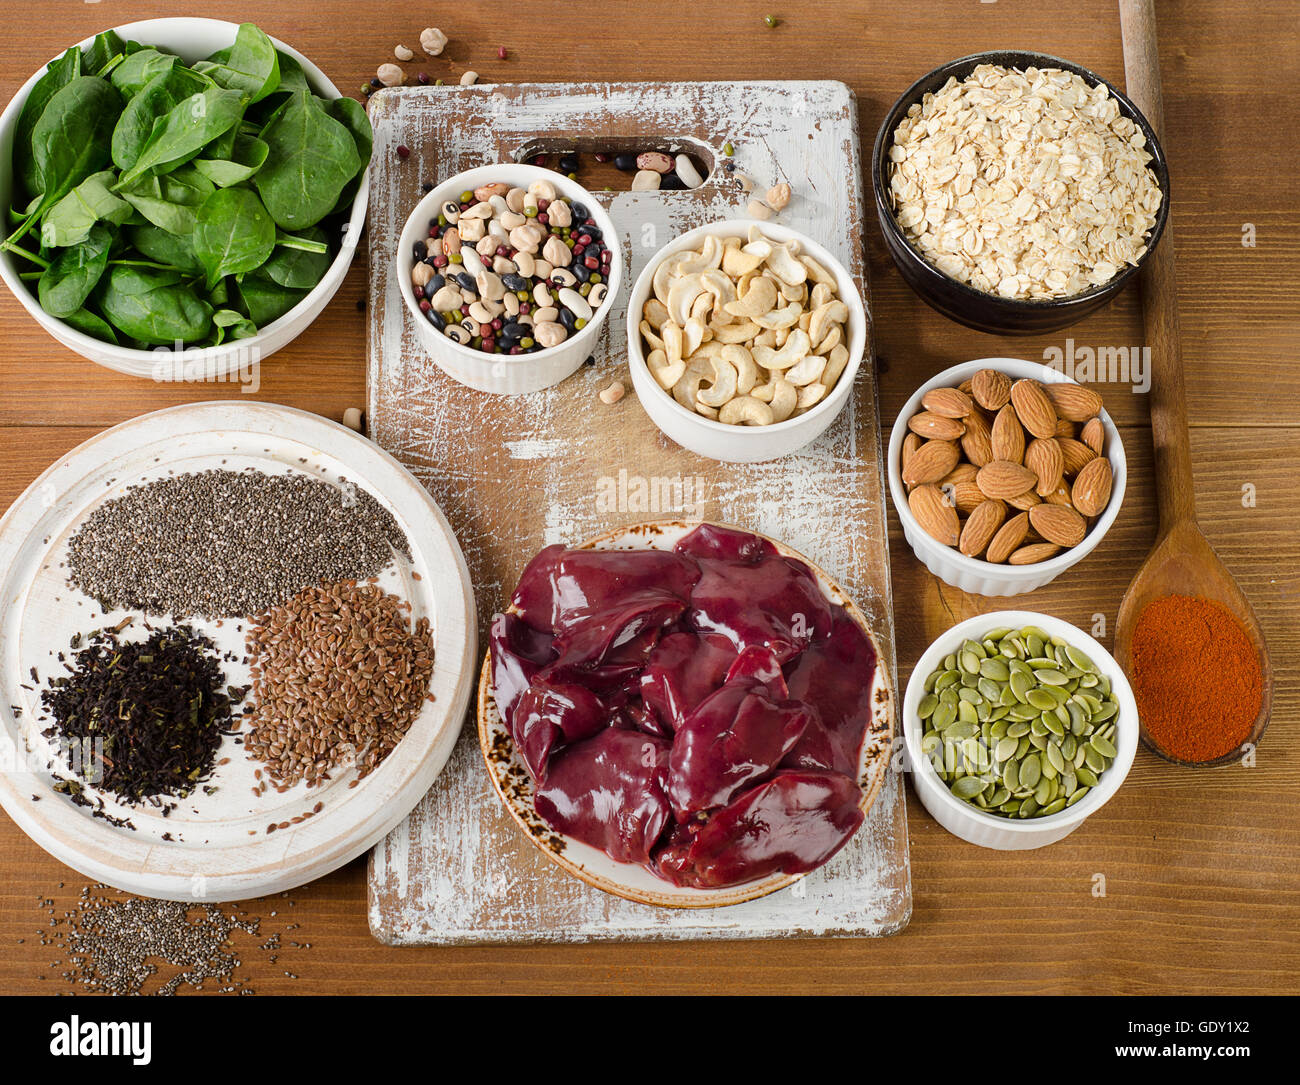 Manganese rich foods. Healthy diet eating. Top view Stock Photo